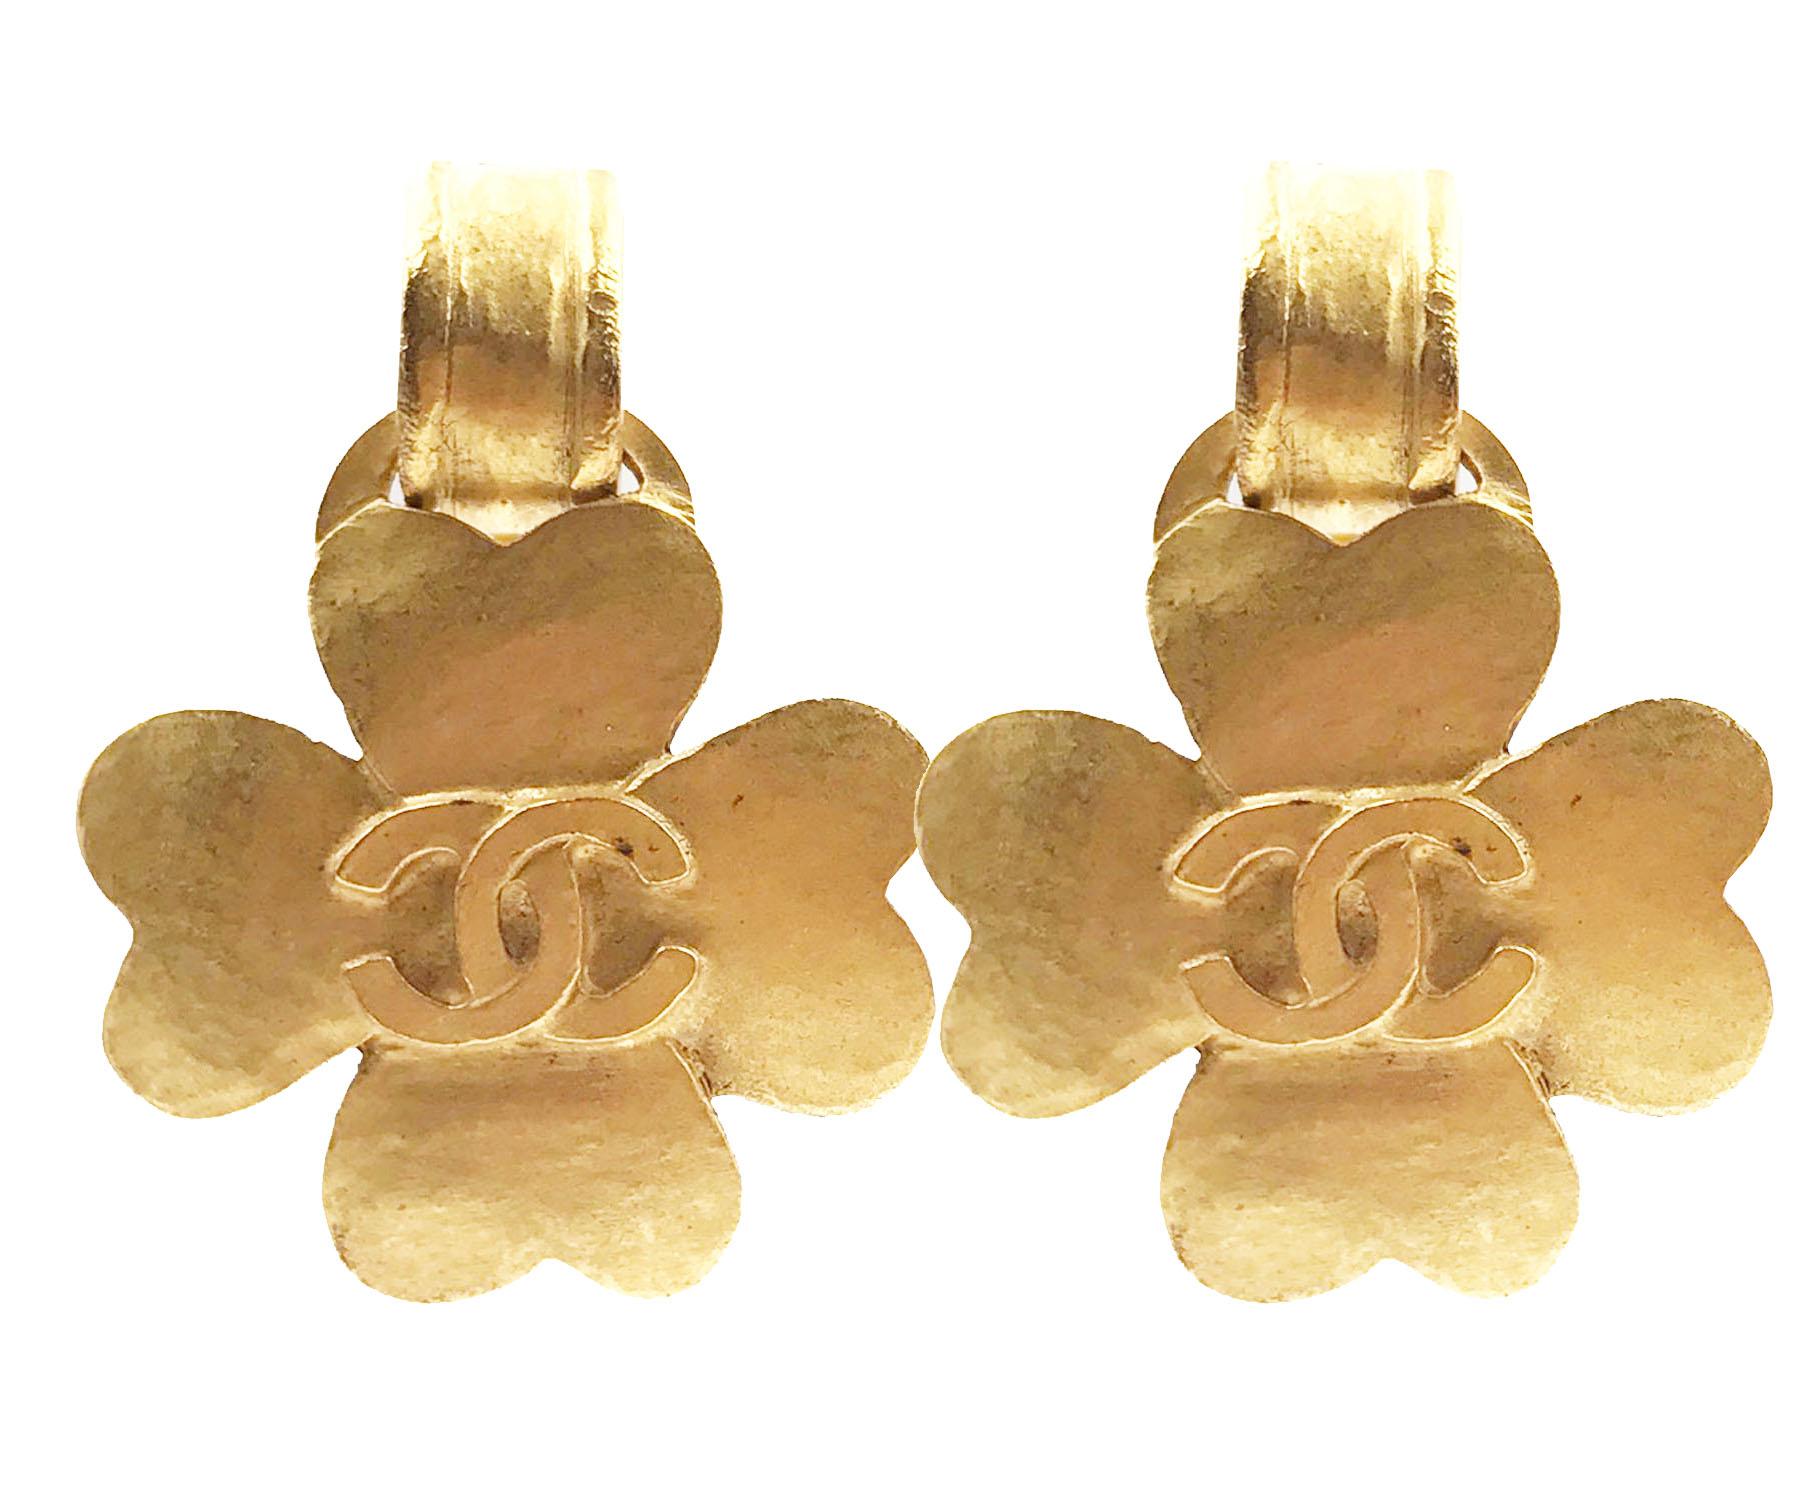 Chanel Vintage Gold Plated CC Clover Clip on Earrings

* Marked 95
* Made in France
* Comes with the original box and tag

- It is approximately 1.25